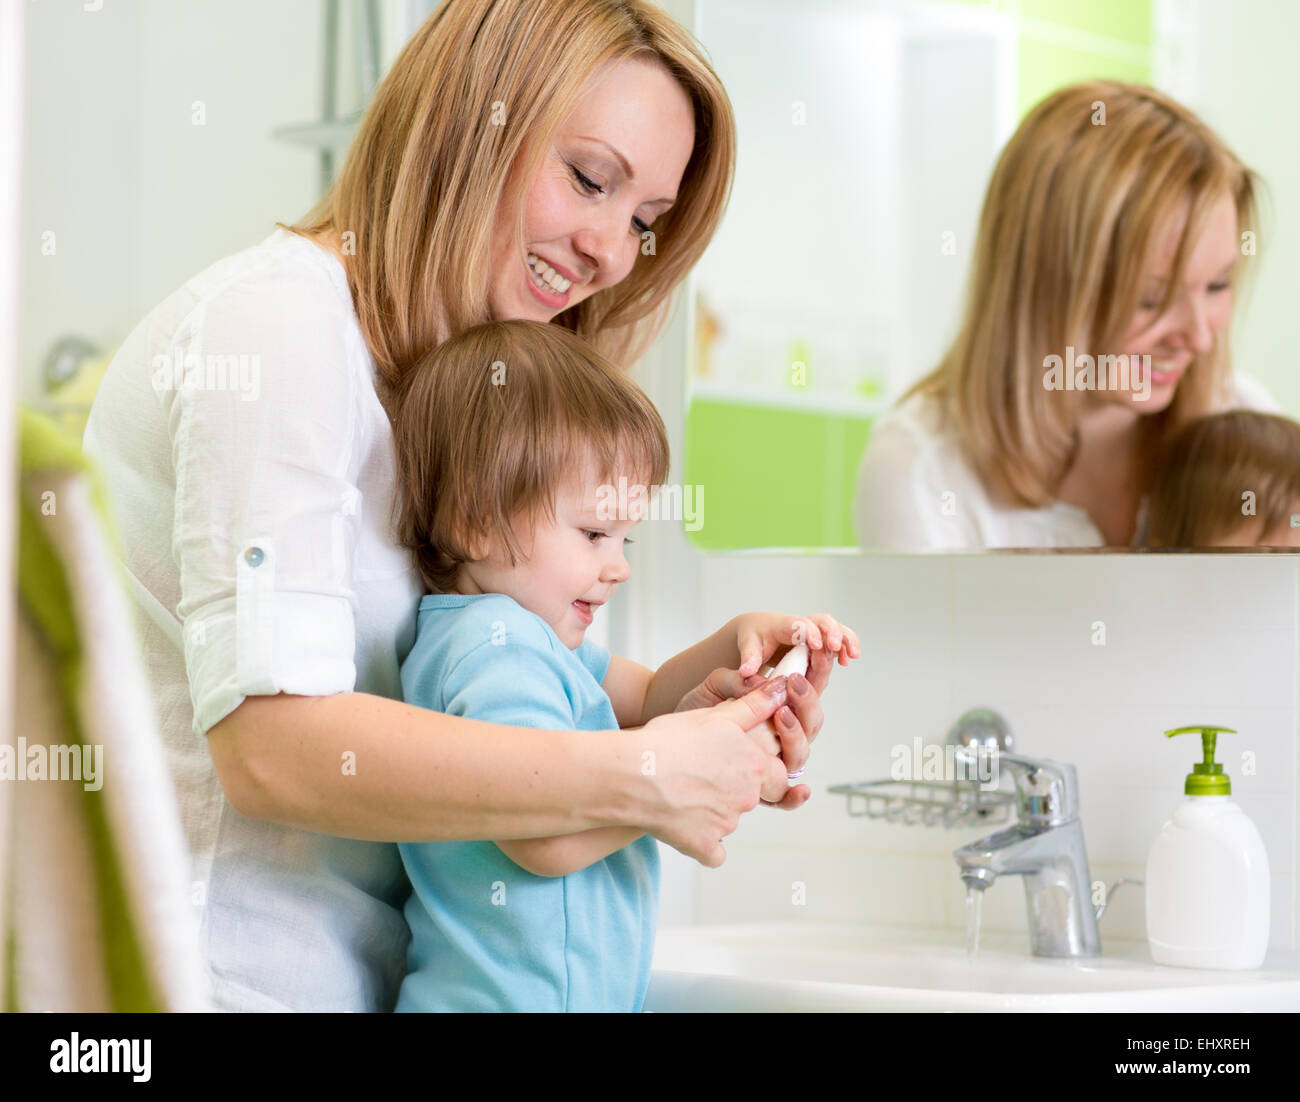 mother teaches kid washing hands in bathroom Stock Photo